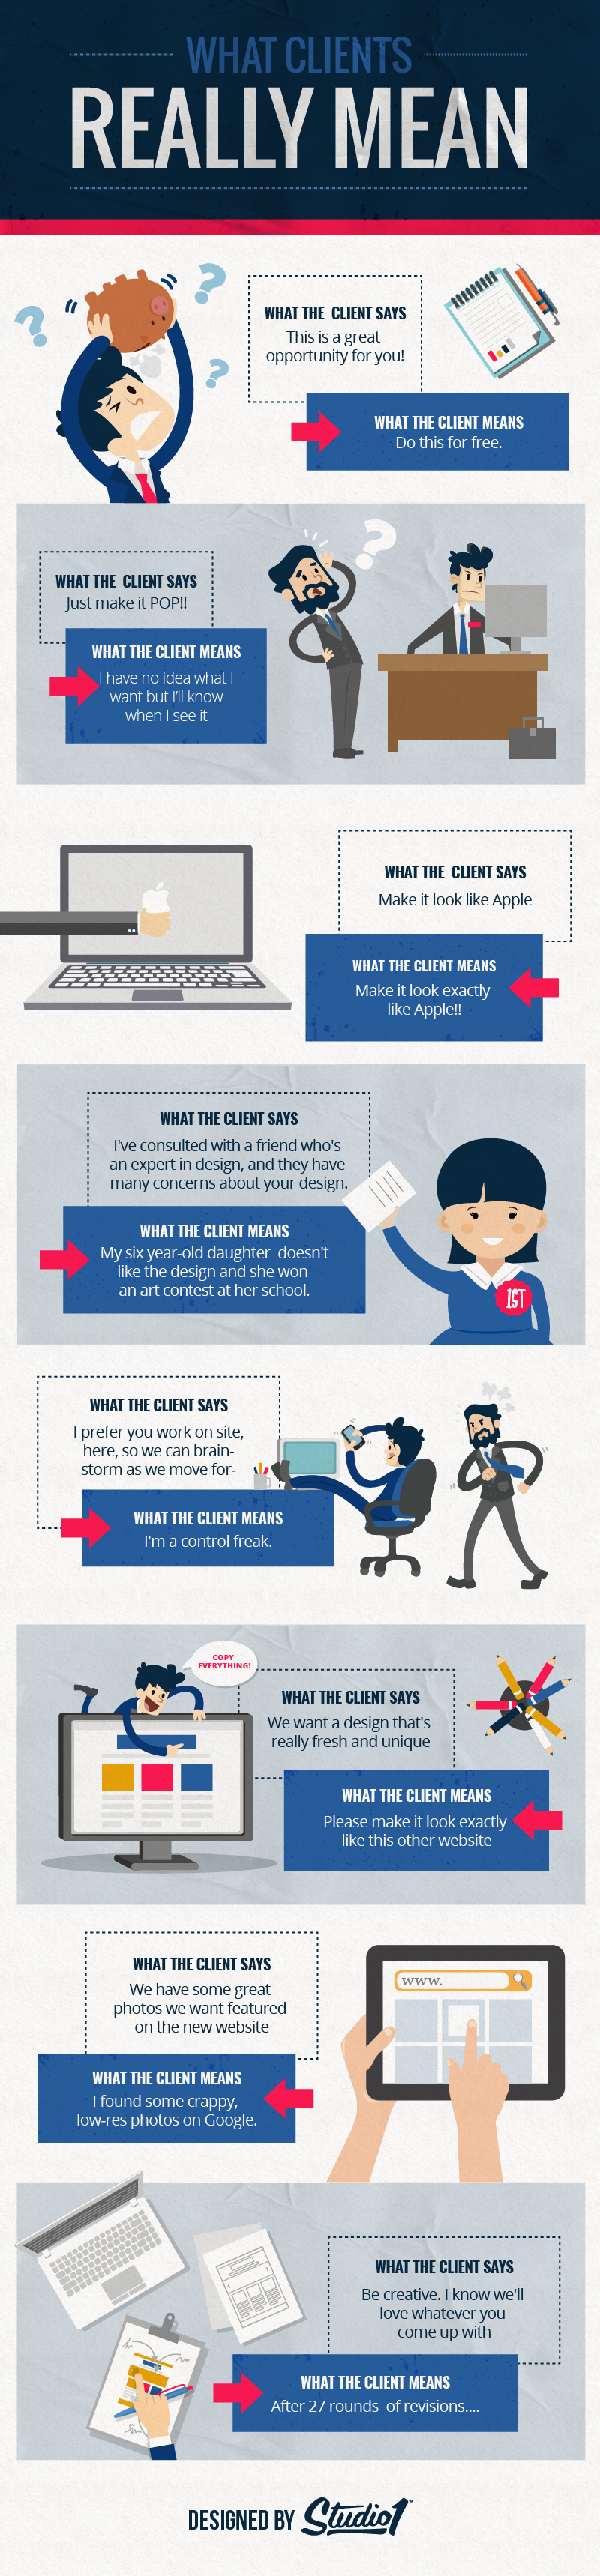 WHAT CLIENTS REALLY MEAN - INFOGRAPHIC-01